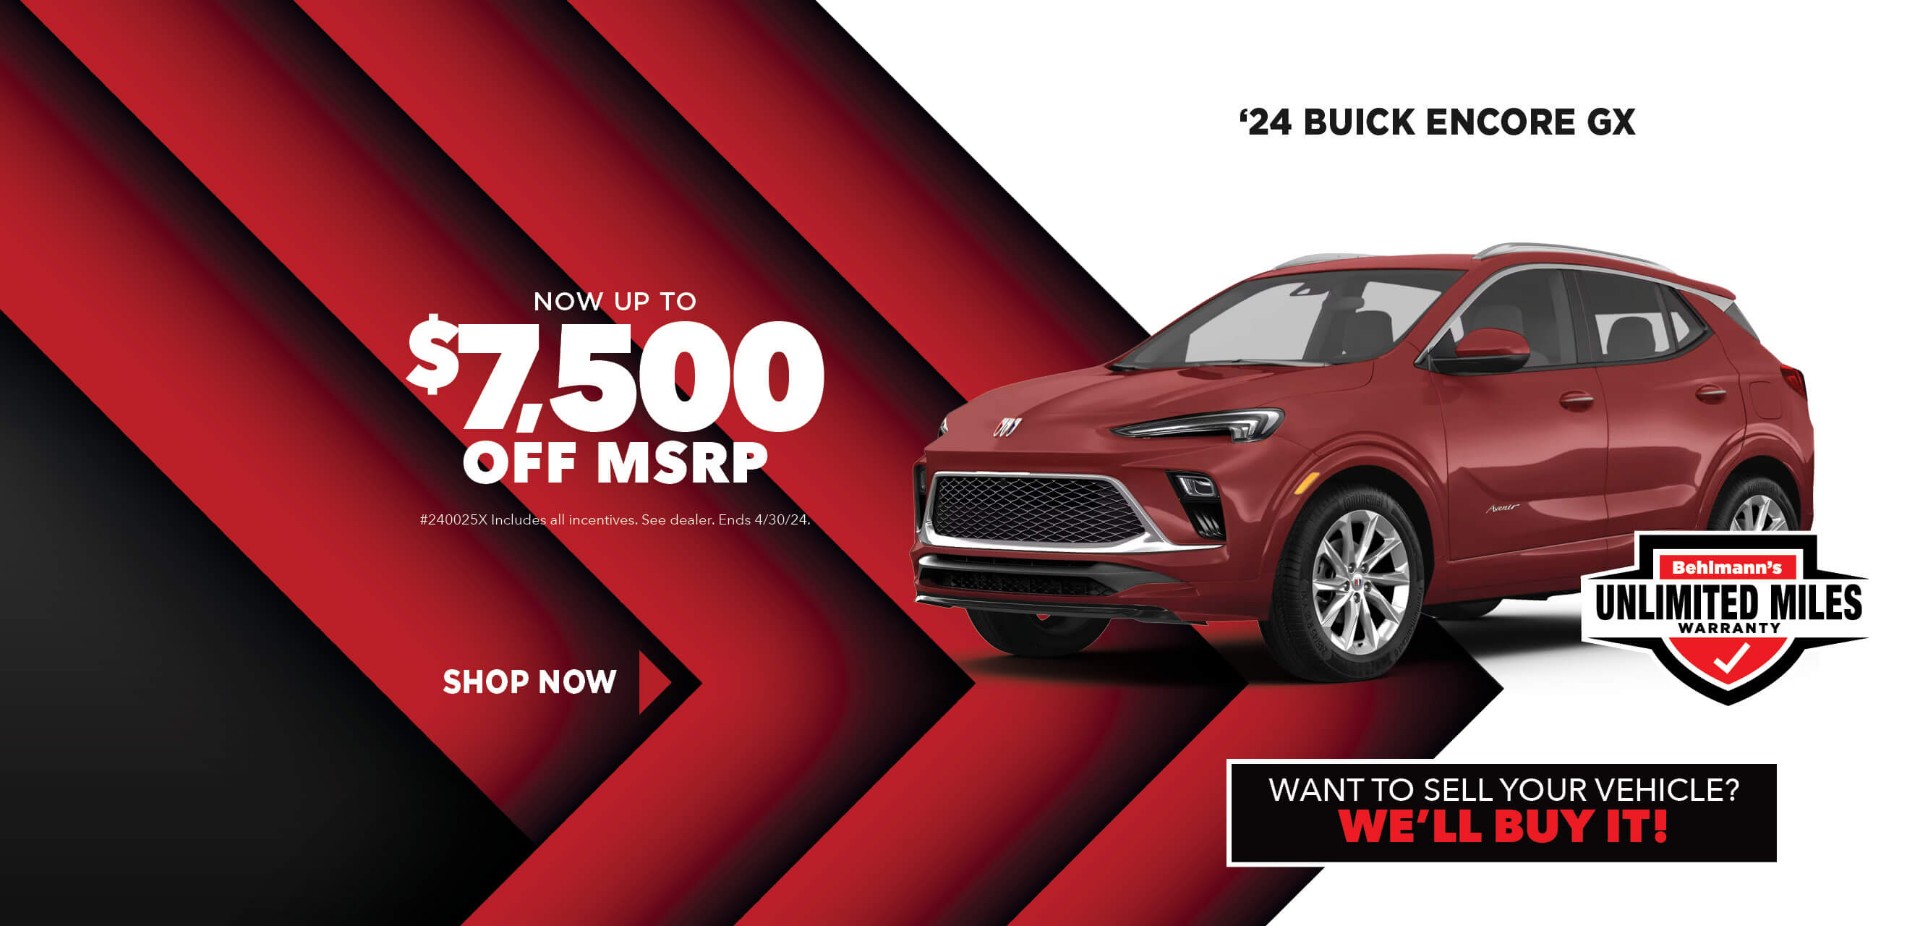 Red SUV with advertising slogans: April Savings - Save up to $7,500 off MSRP on 2024 Buick Encore GX.